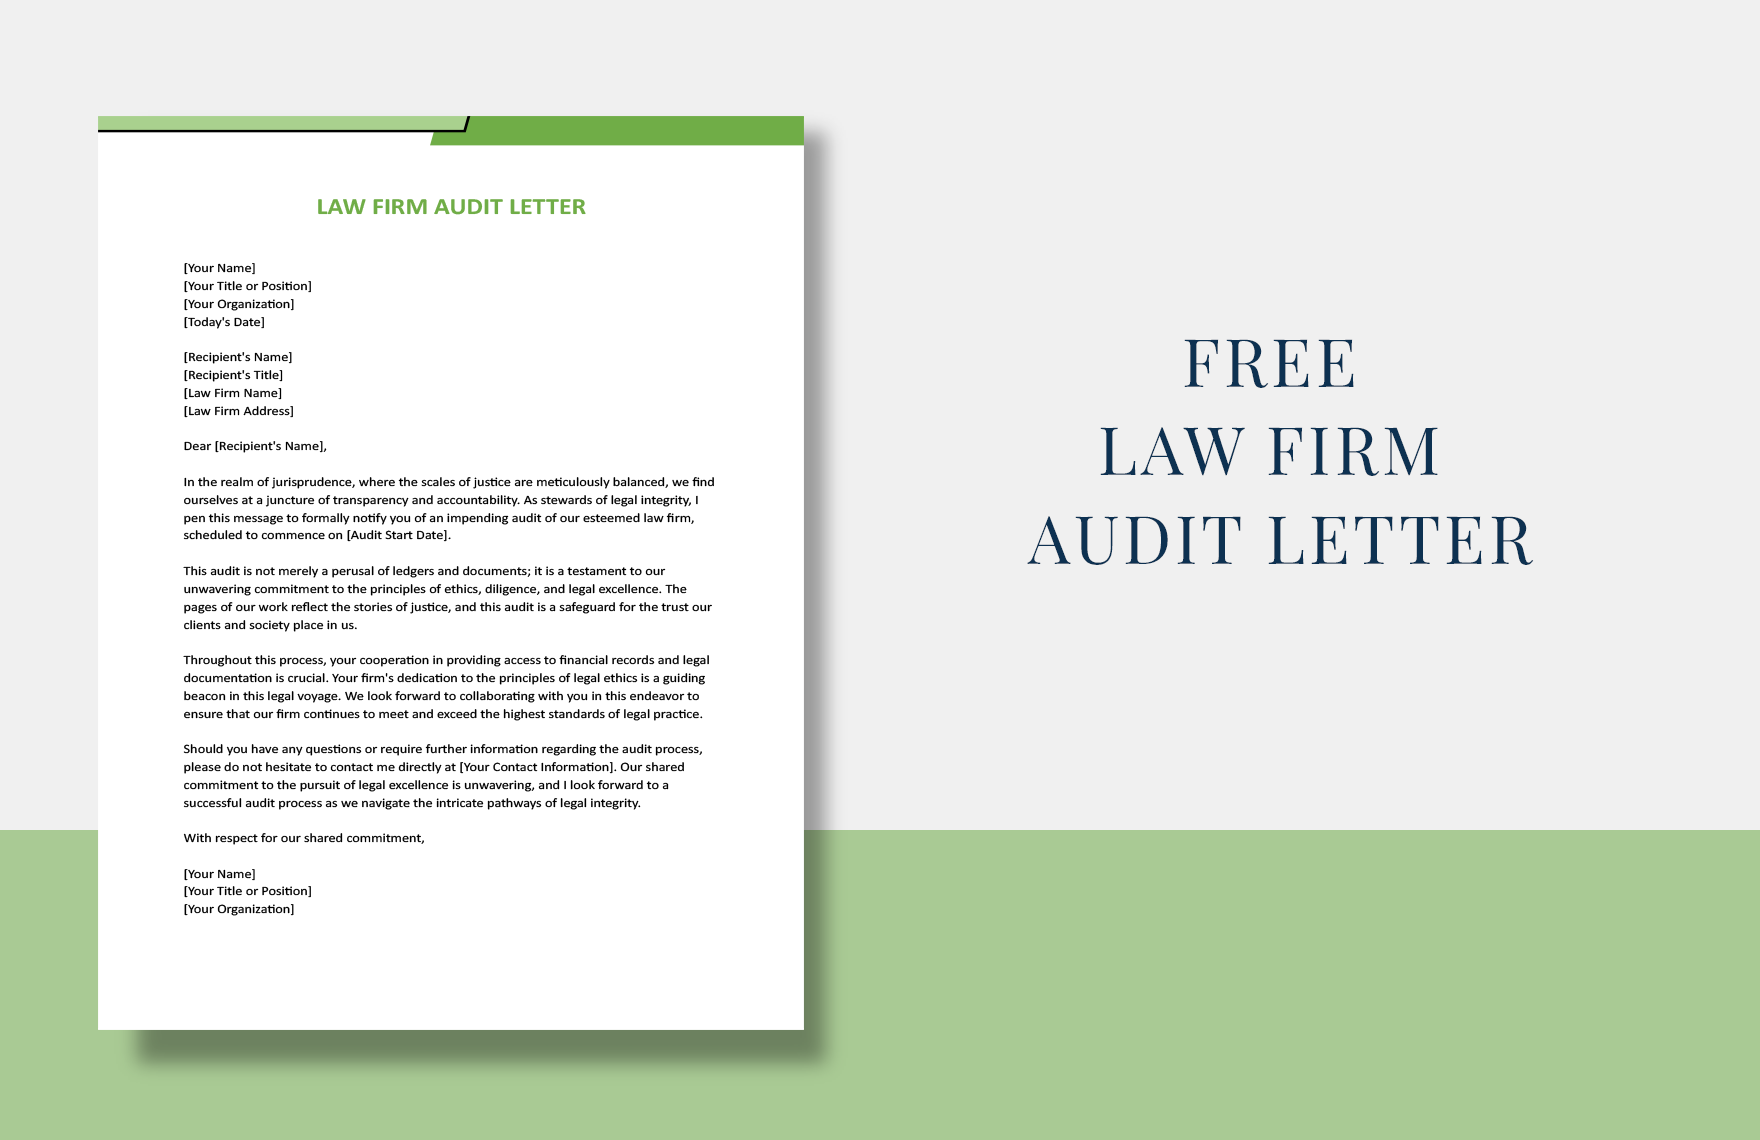 Law Firm Audit Letter in Word, Google Docs